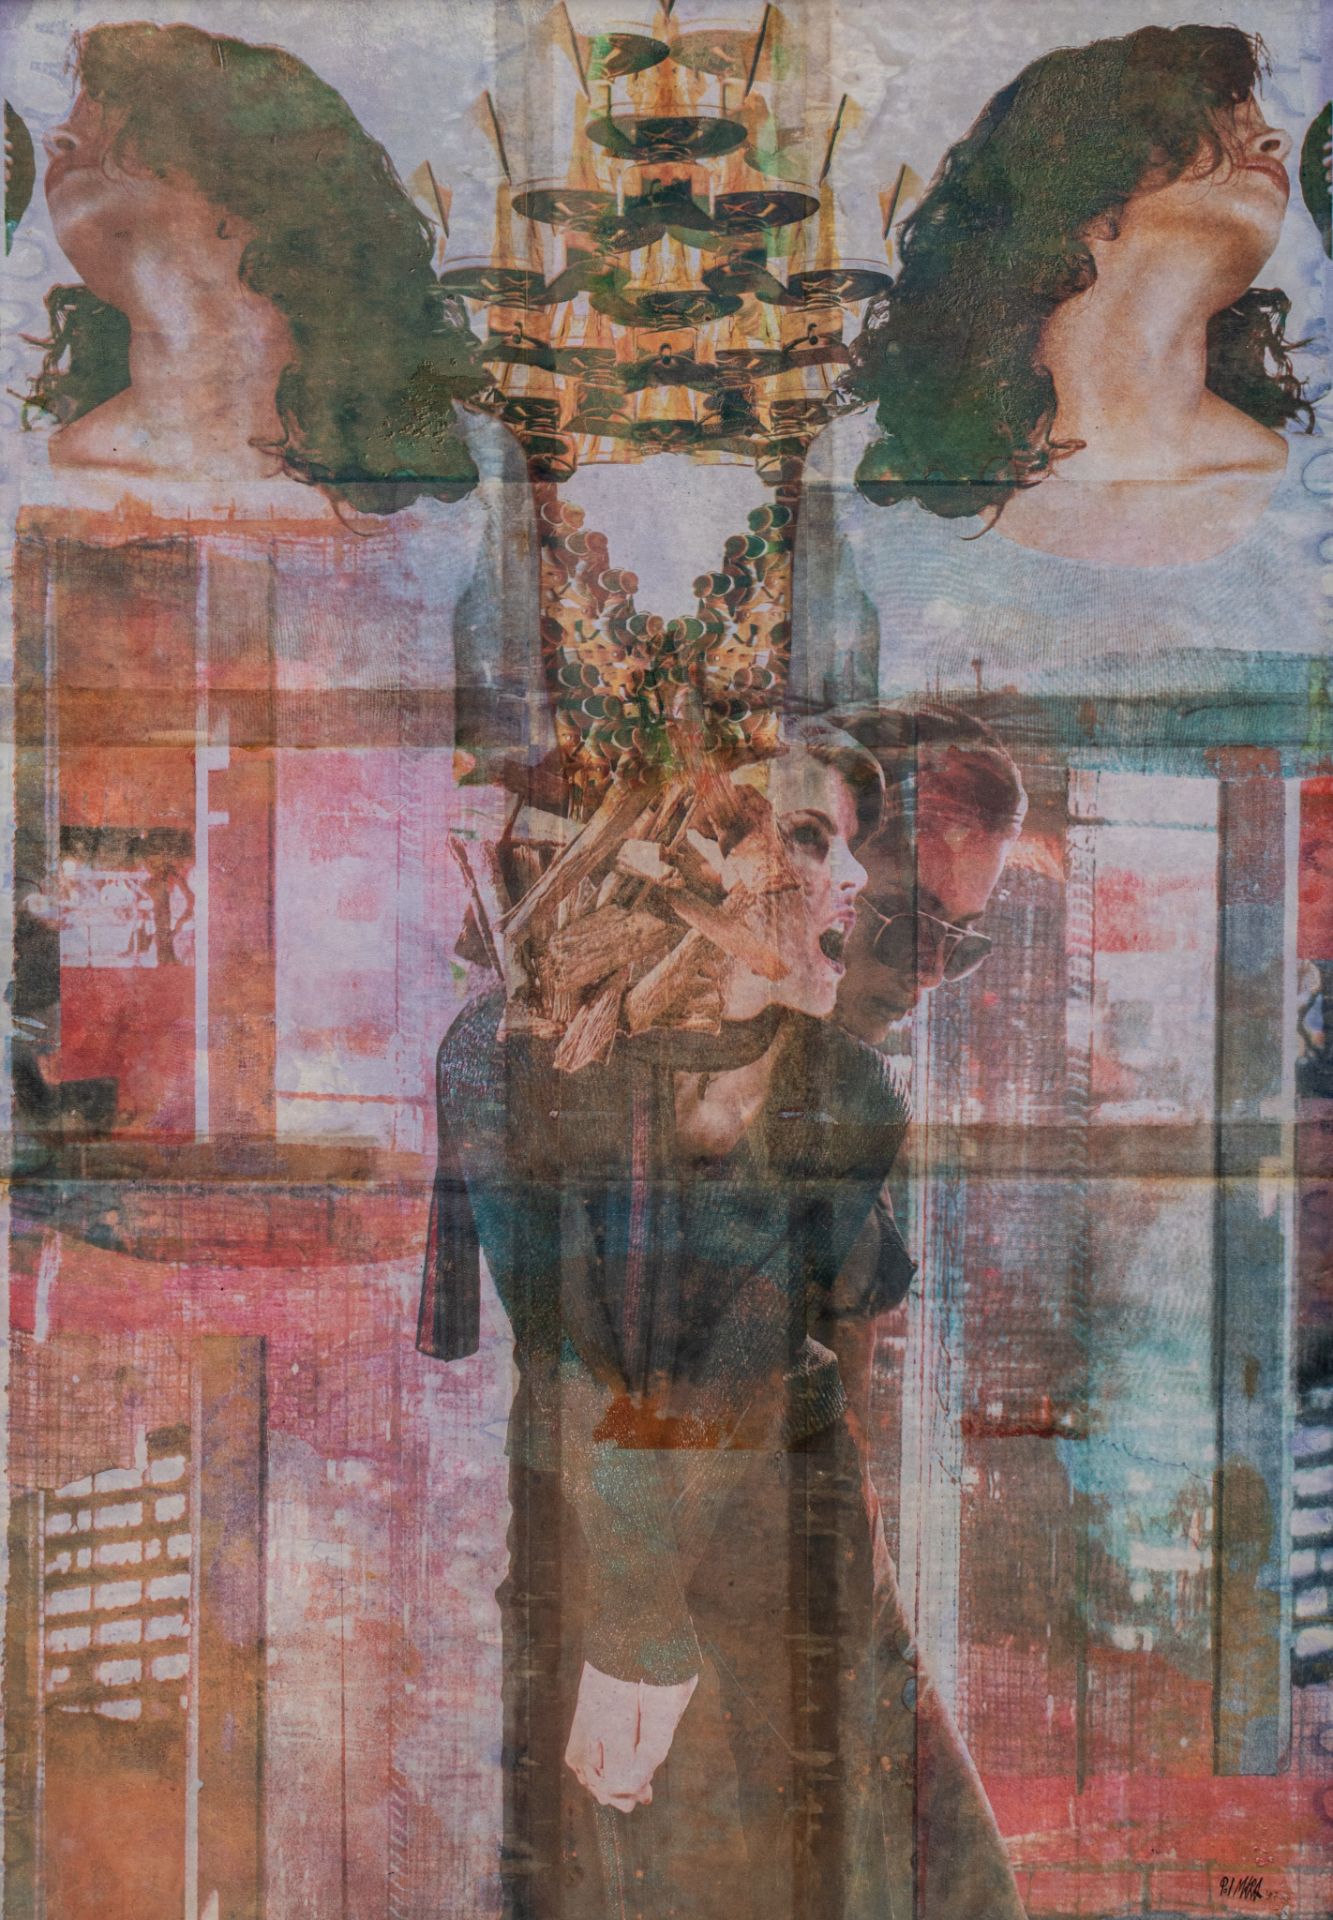 Pol Mara (1920-1998), Double-sided watercolour on paper on panel, 1997, 80 x 100 cm - Image 4 of 7